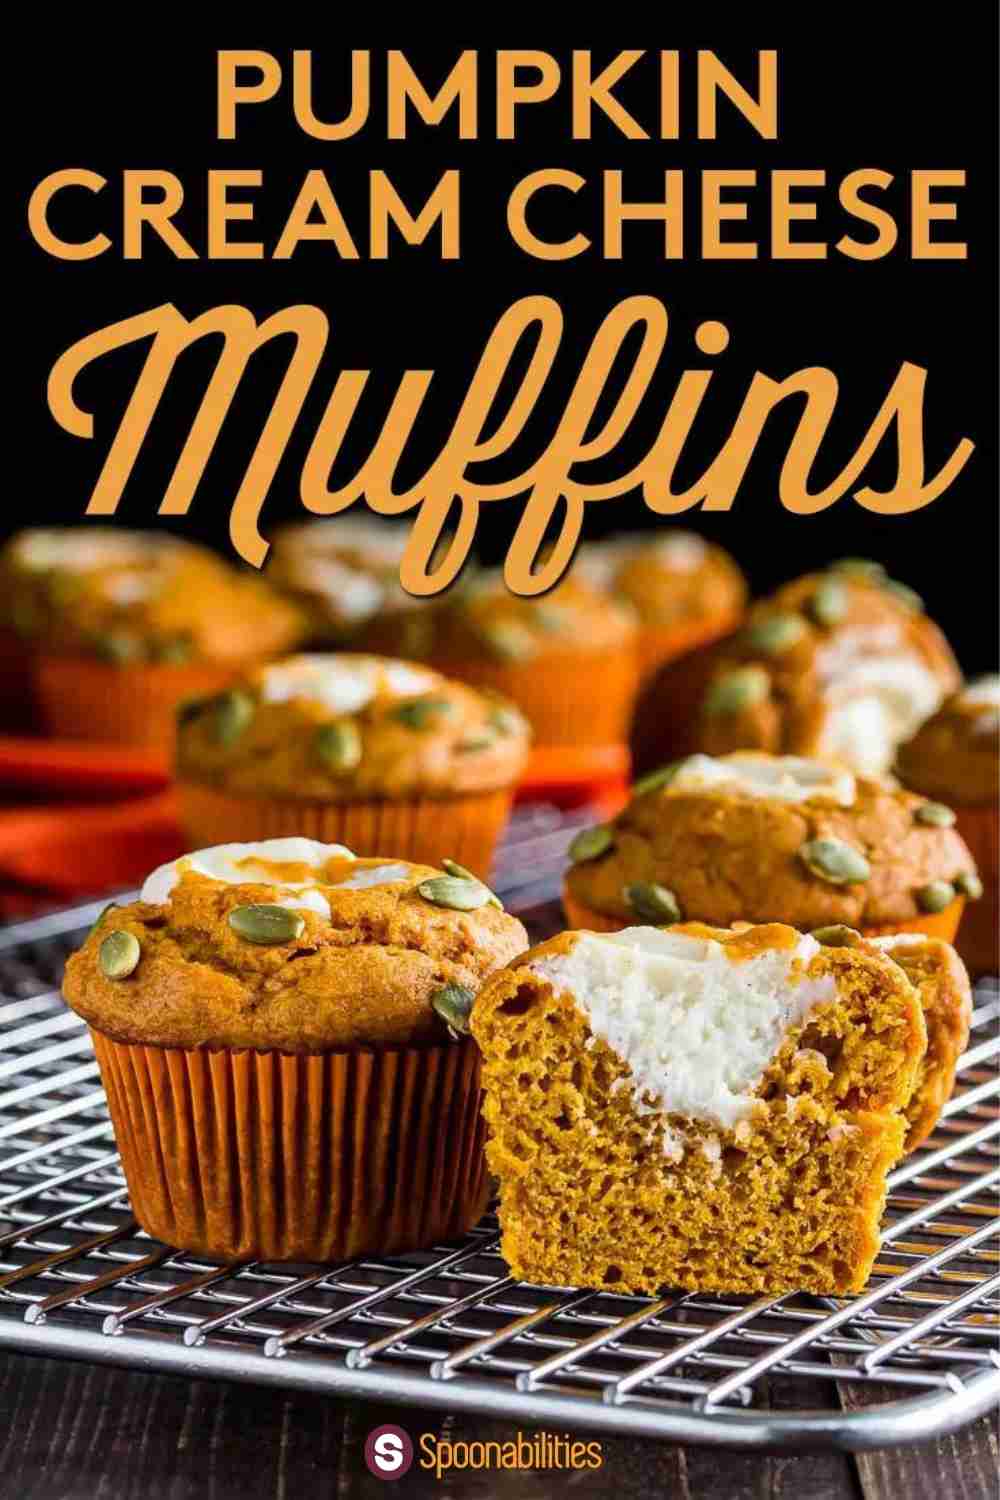 Freshly baked pumpkin muffins with cream cheese filling